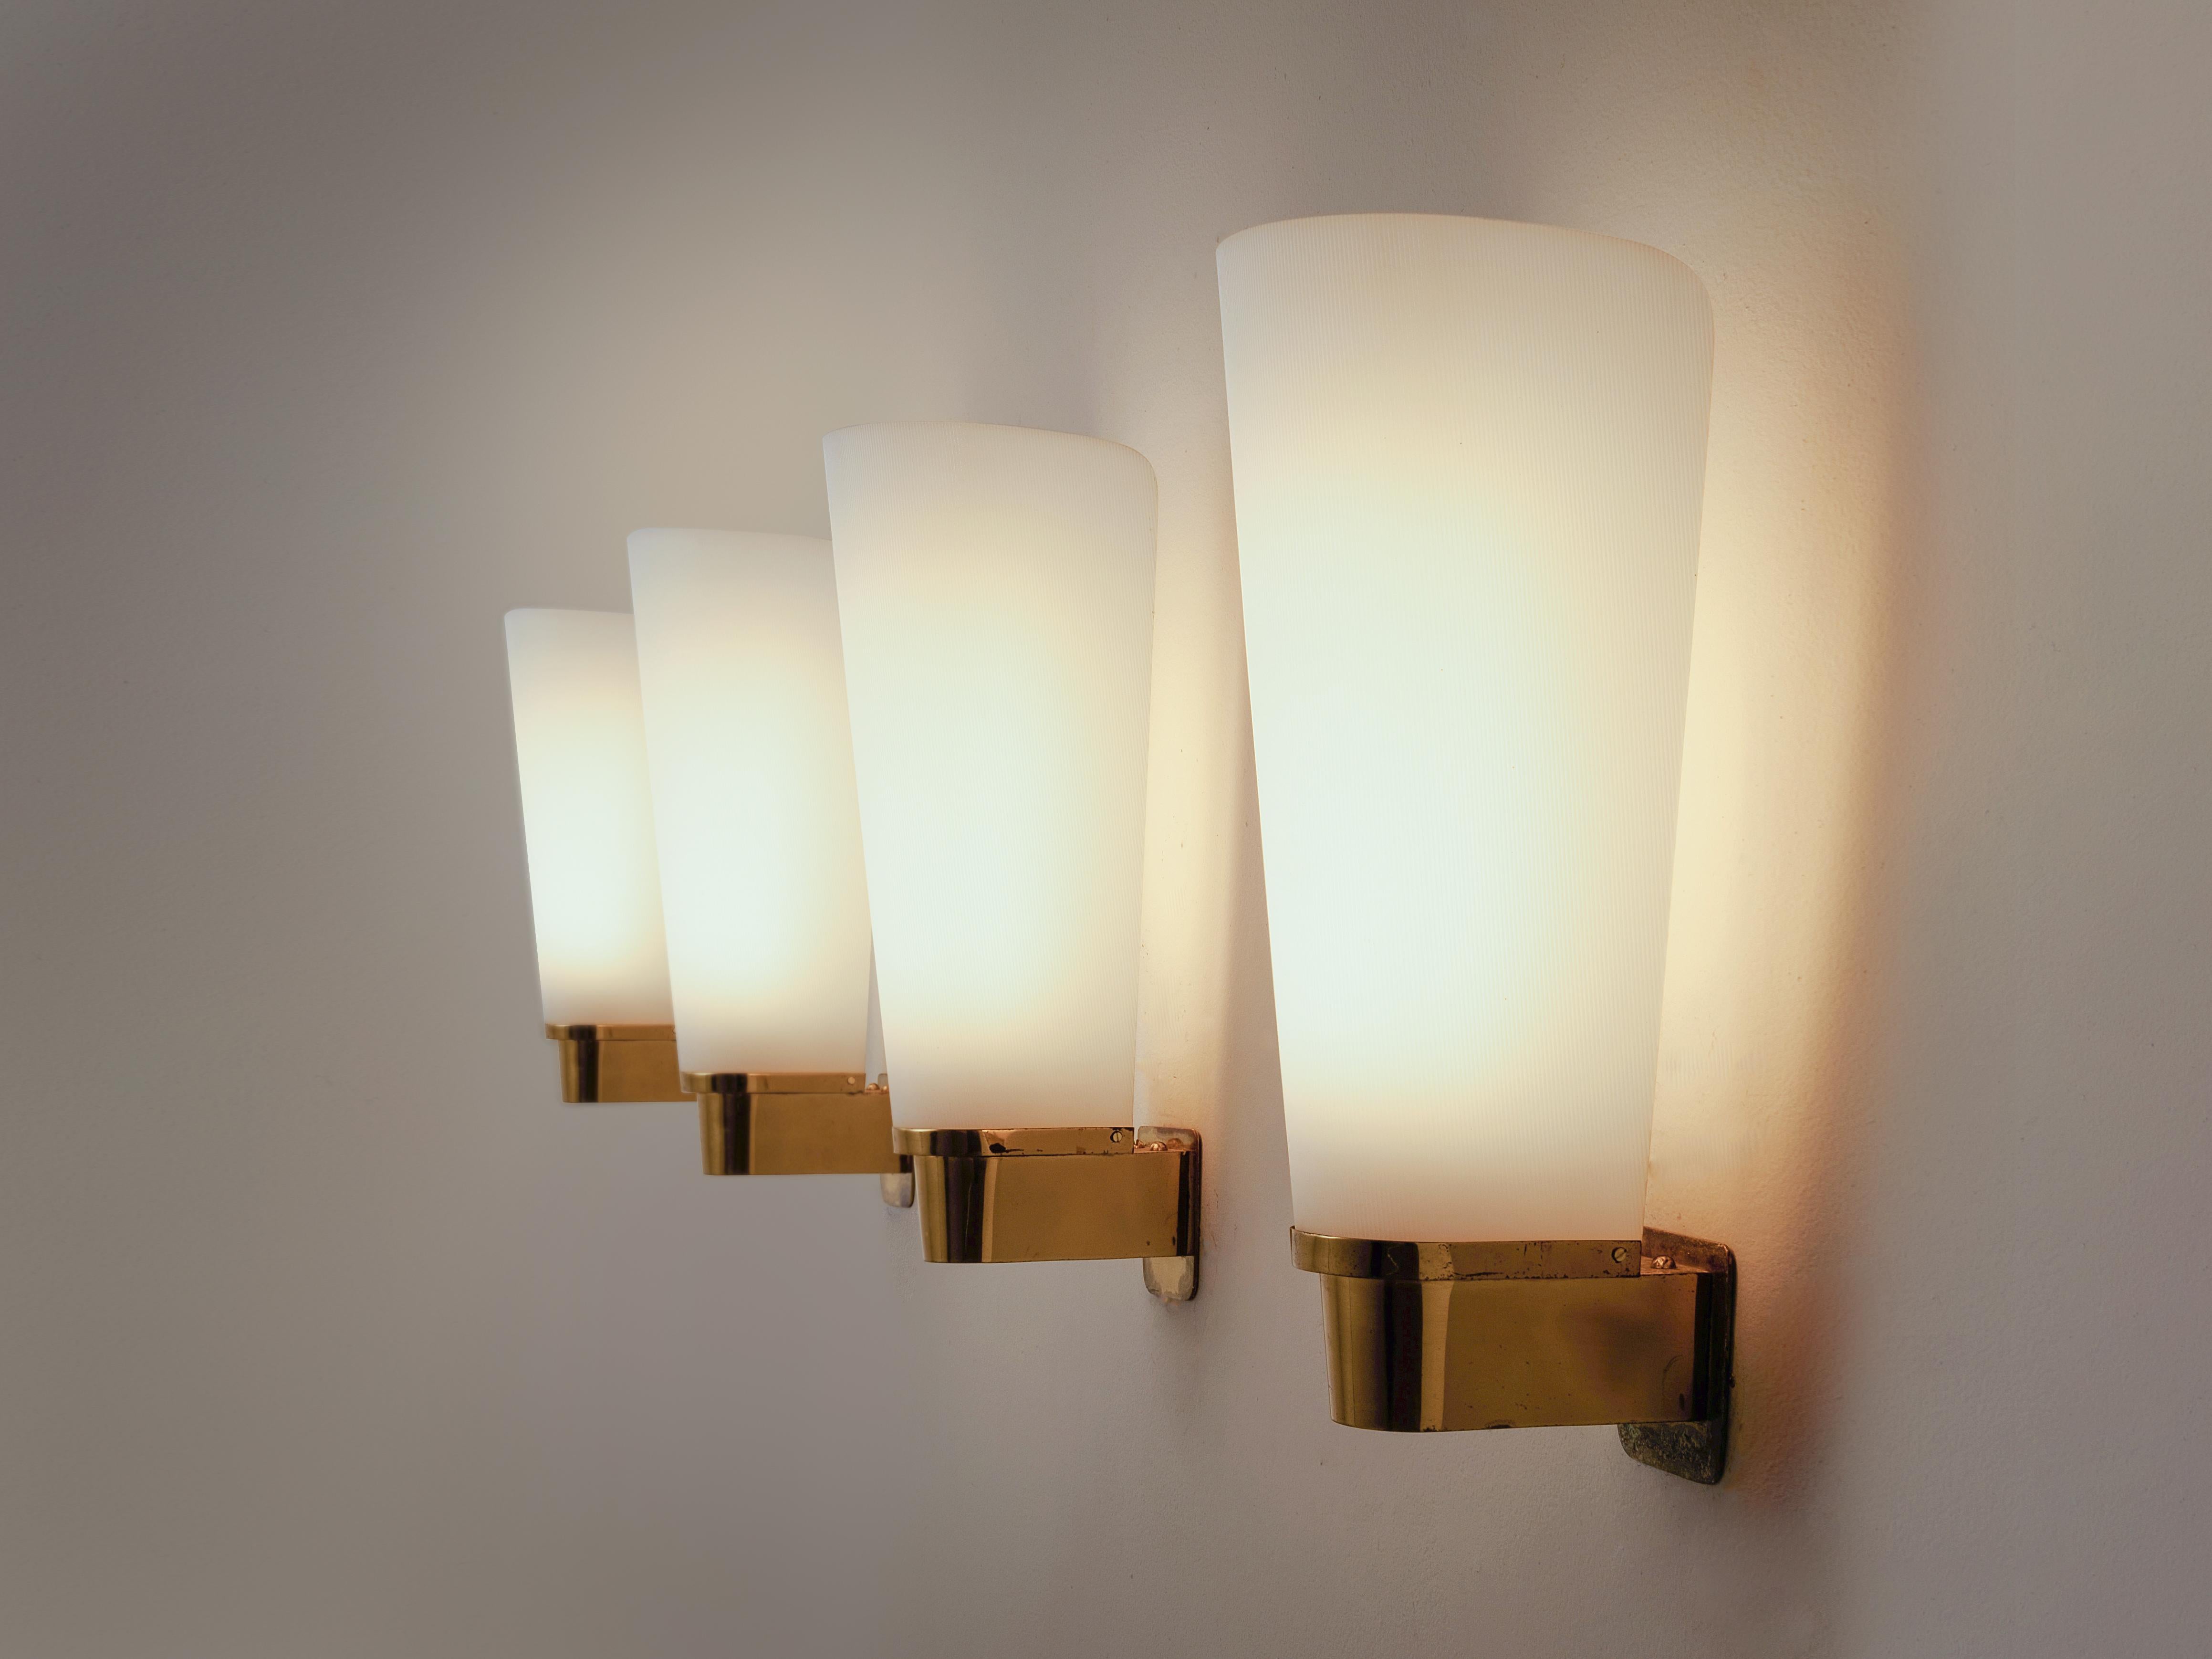 Set of four wall lights, in brass and acrylic, Europe, 1970s

Set of four elegant wall-lights. The wall-mounted fixture is made of brass and shows a nice combination of square and round forms. All with subtle rounded corners. The shade is made of